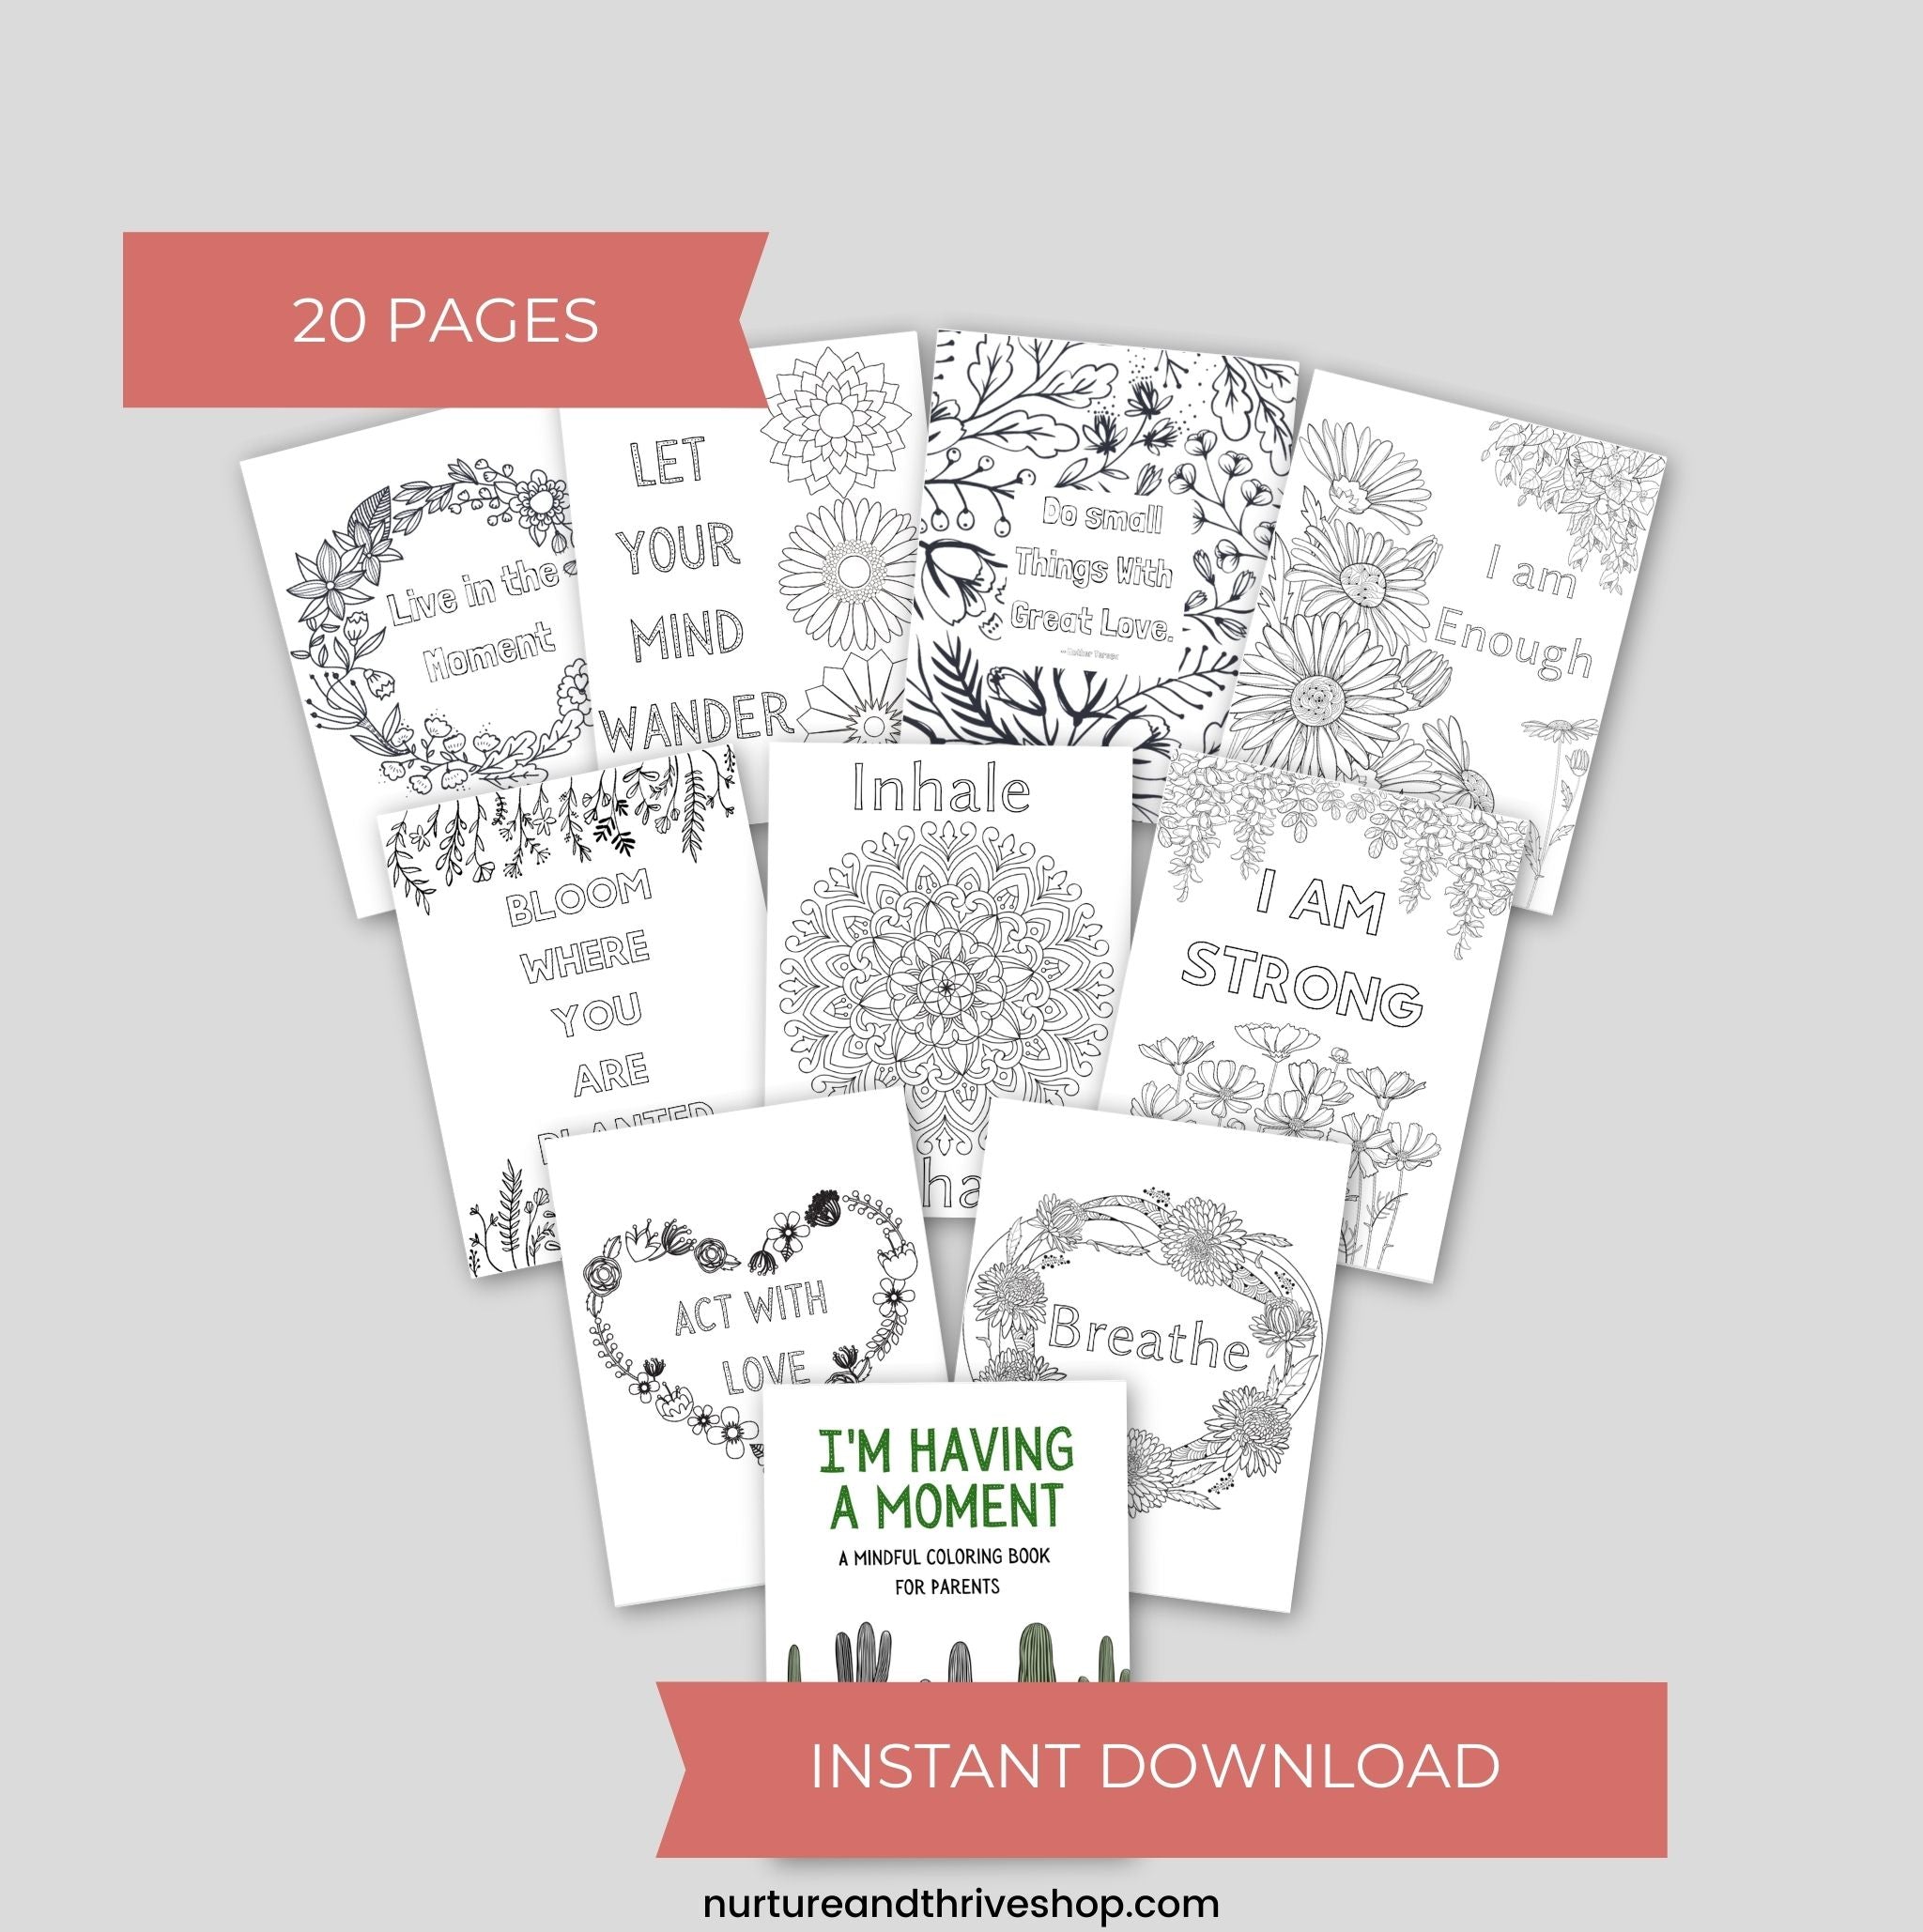 I'm Having a Moment: A Mindful Coloring Book for Parents